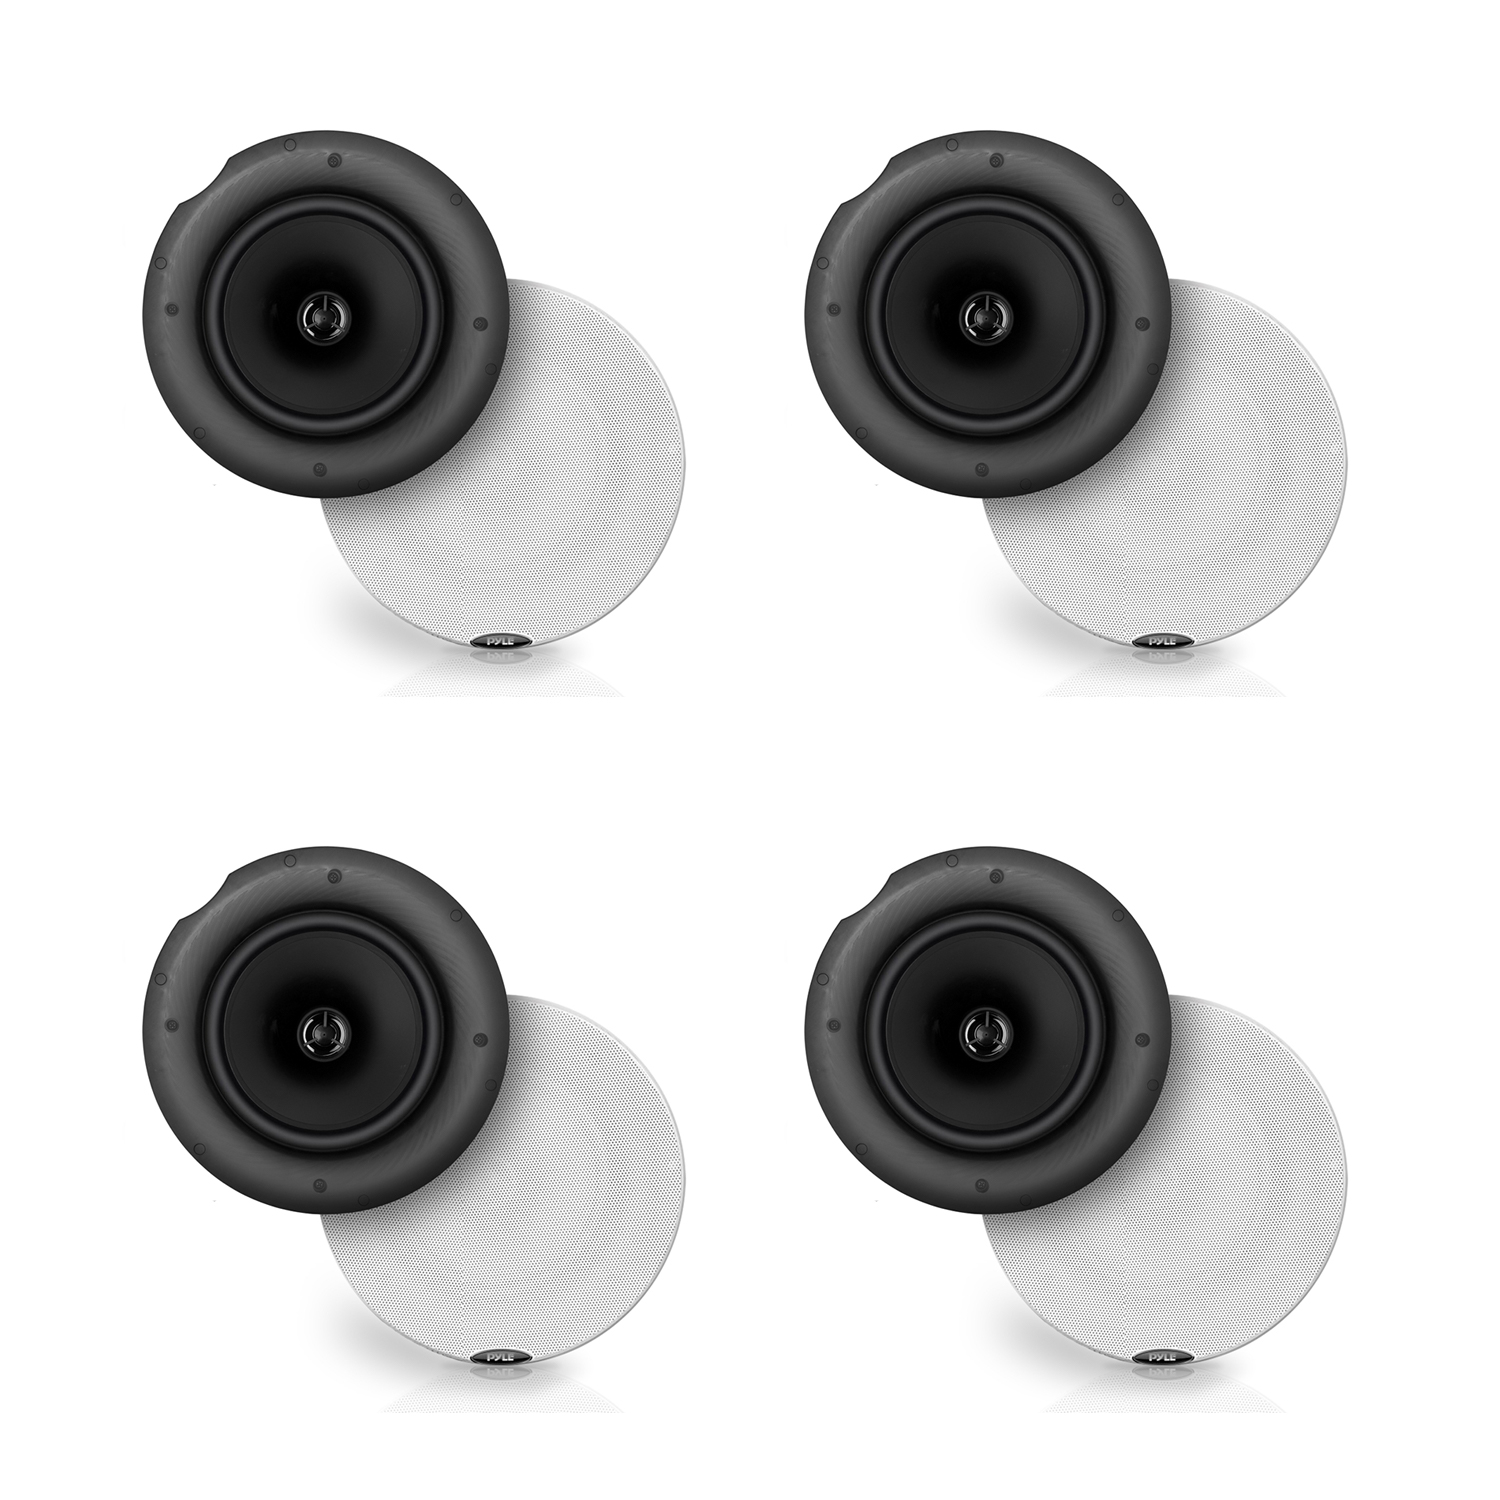 Pyle Audio 6.5" 2 Way Flush Ceiling/Wall Mount Bluetooth Speakers, Pair (4 Pack) - image 1 of 8